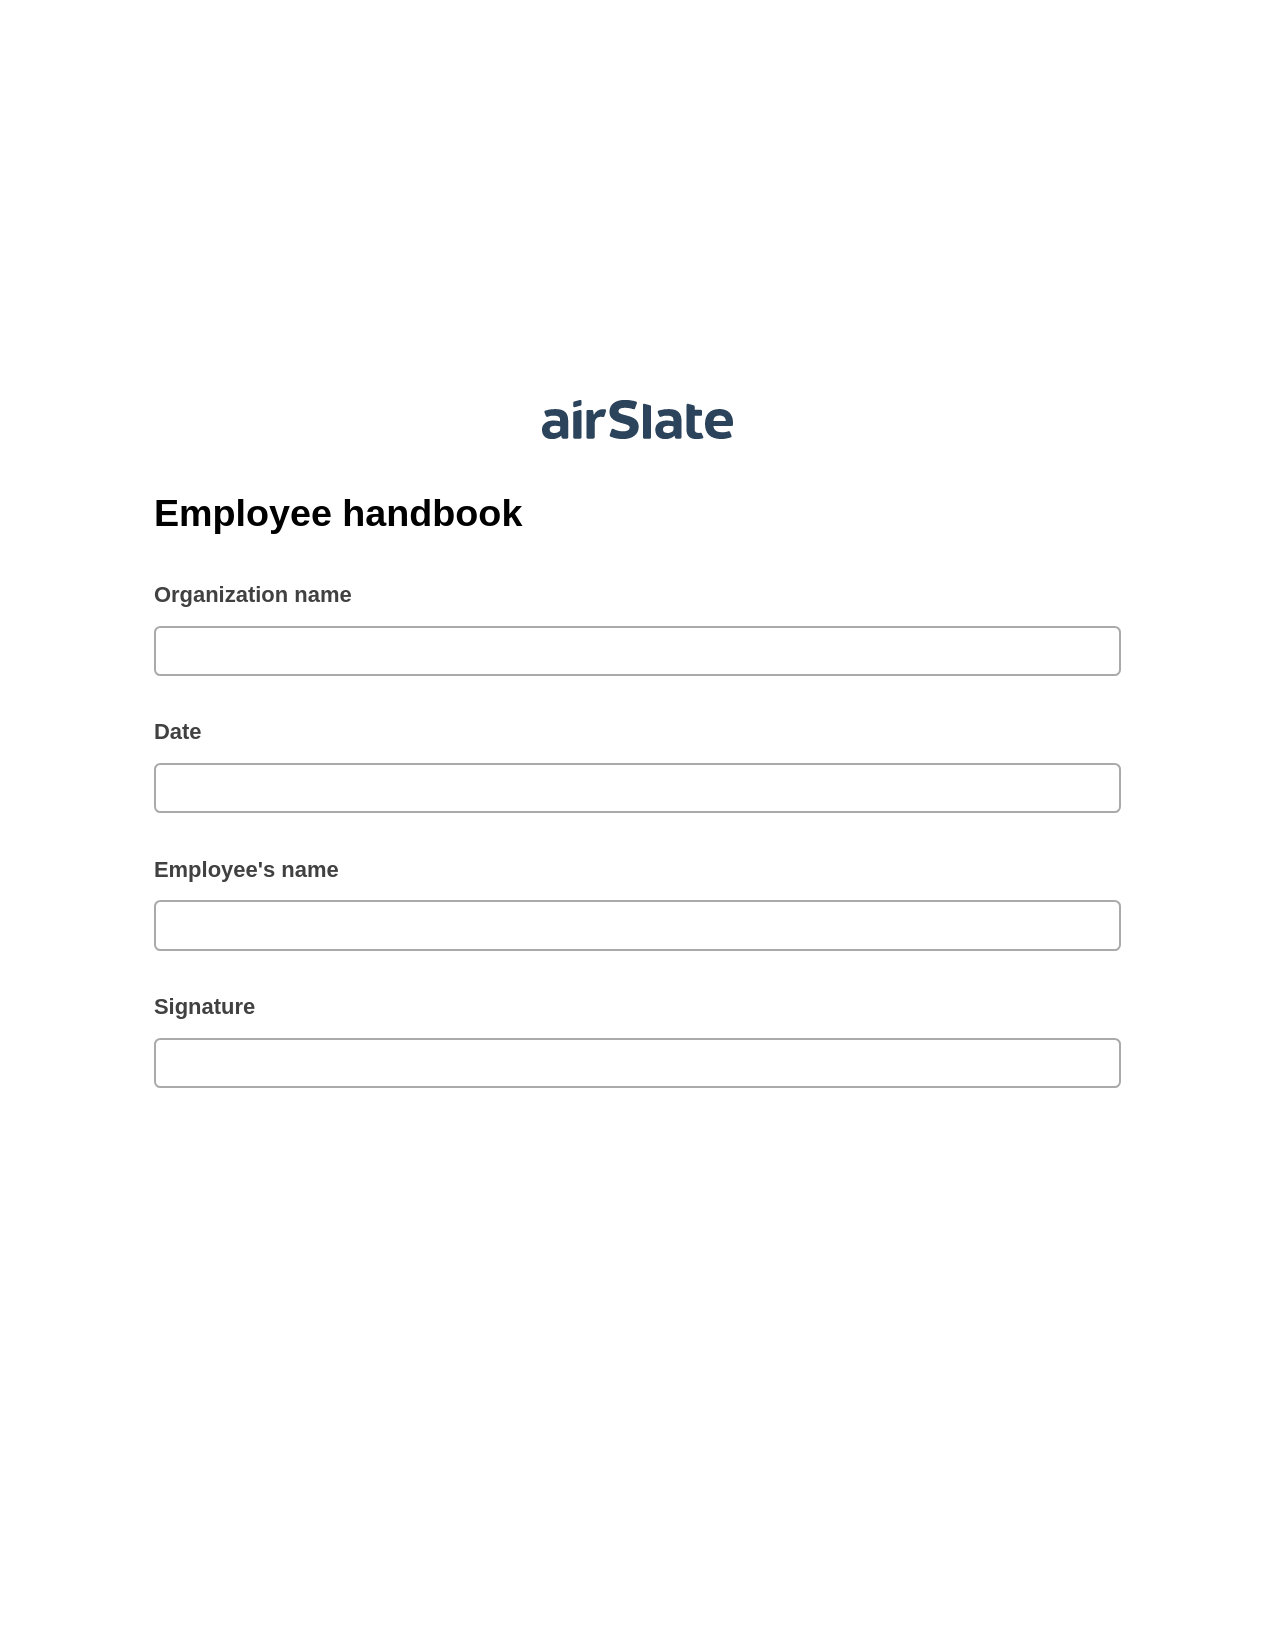 Multirole Employee handbook Pre-fill from Salesforce Record Bot, Lock the slate bot, Export to Formstack Documents Bot